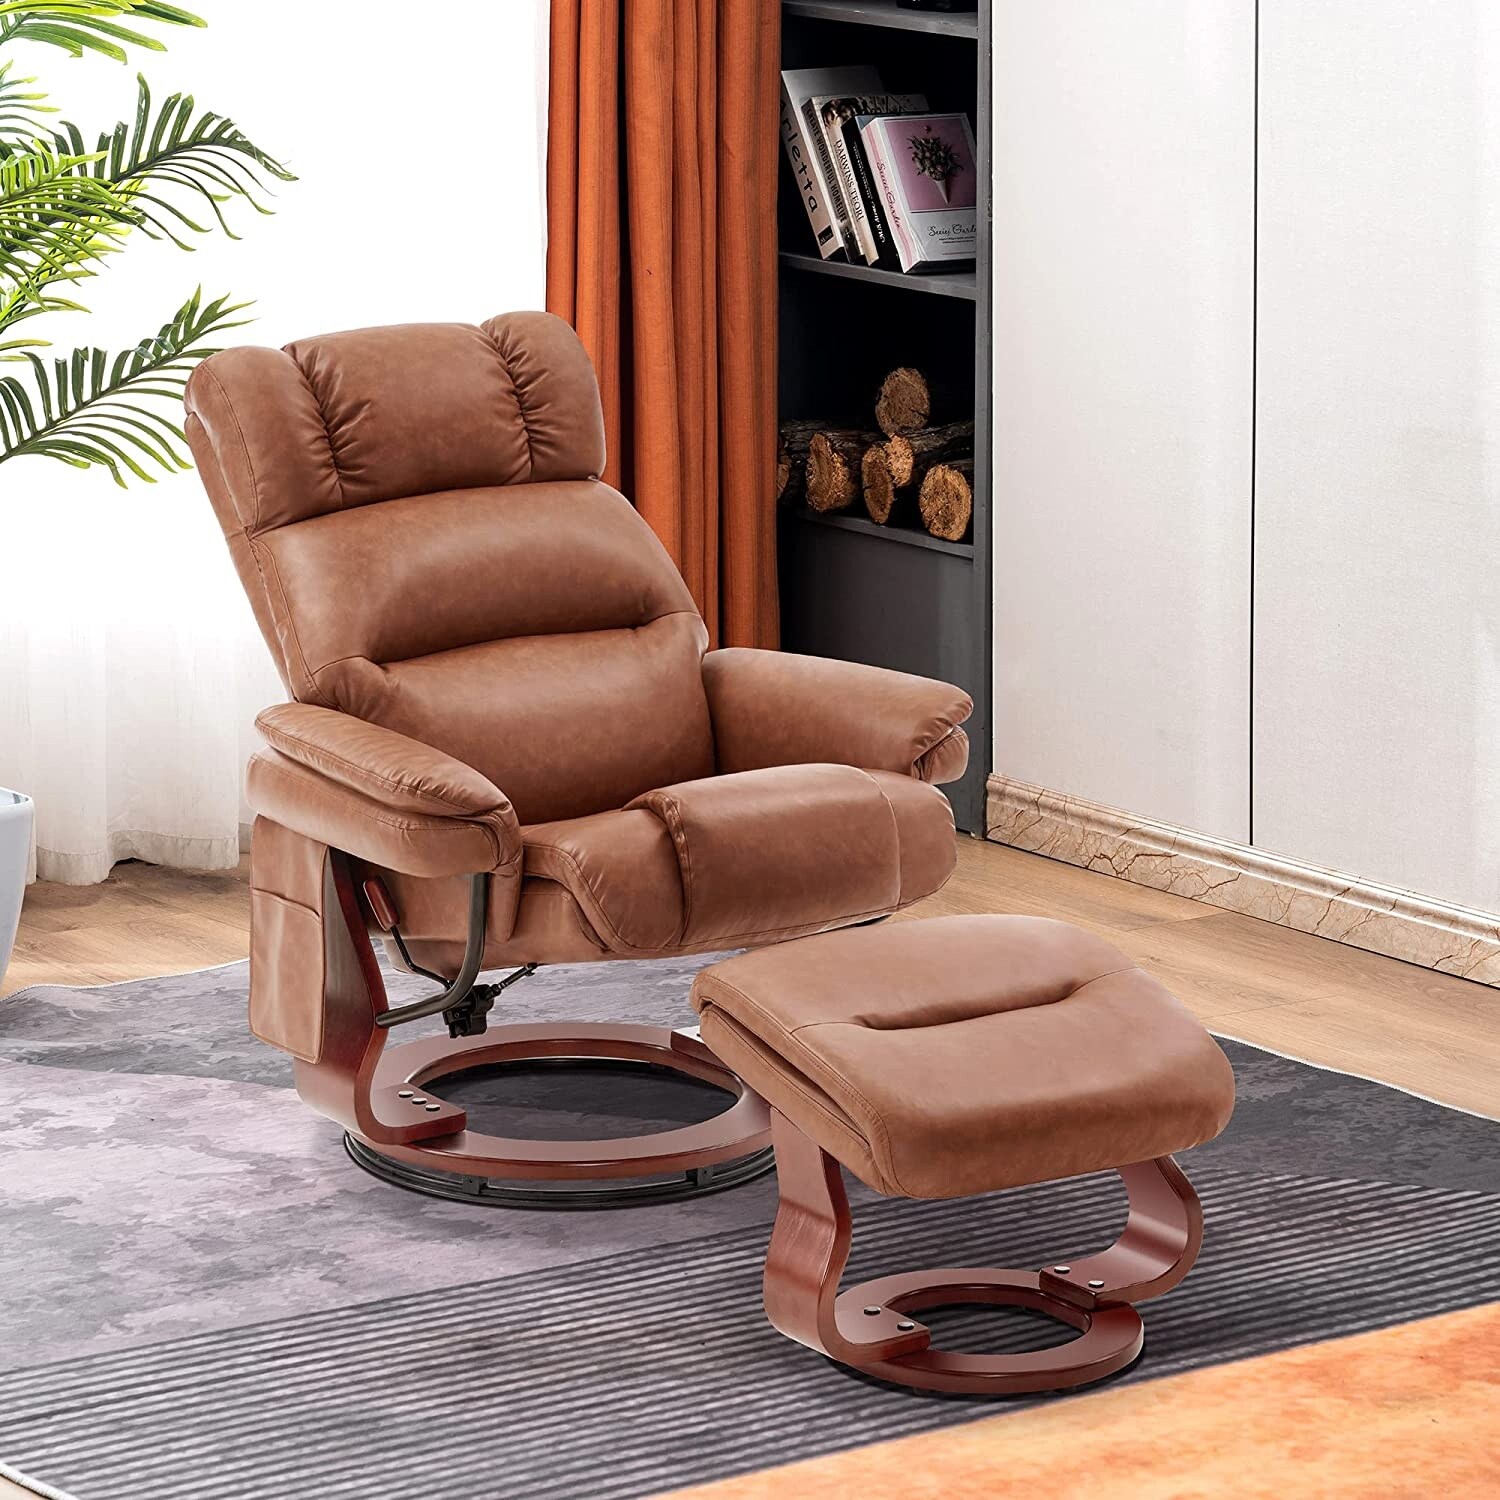 https://ak1.ostkcdn.com/images/products/is/images/direct/665a406768a45ddd5a12b7243074d872616750d1/MCombo-Swivel-Recliners-with-Ottoman%2C-Reclining-TV-Chairs-with-Vibration-Massage%2C-Ergonomic-Lounge-Chair-for-Living-4832.jpg